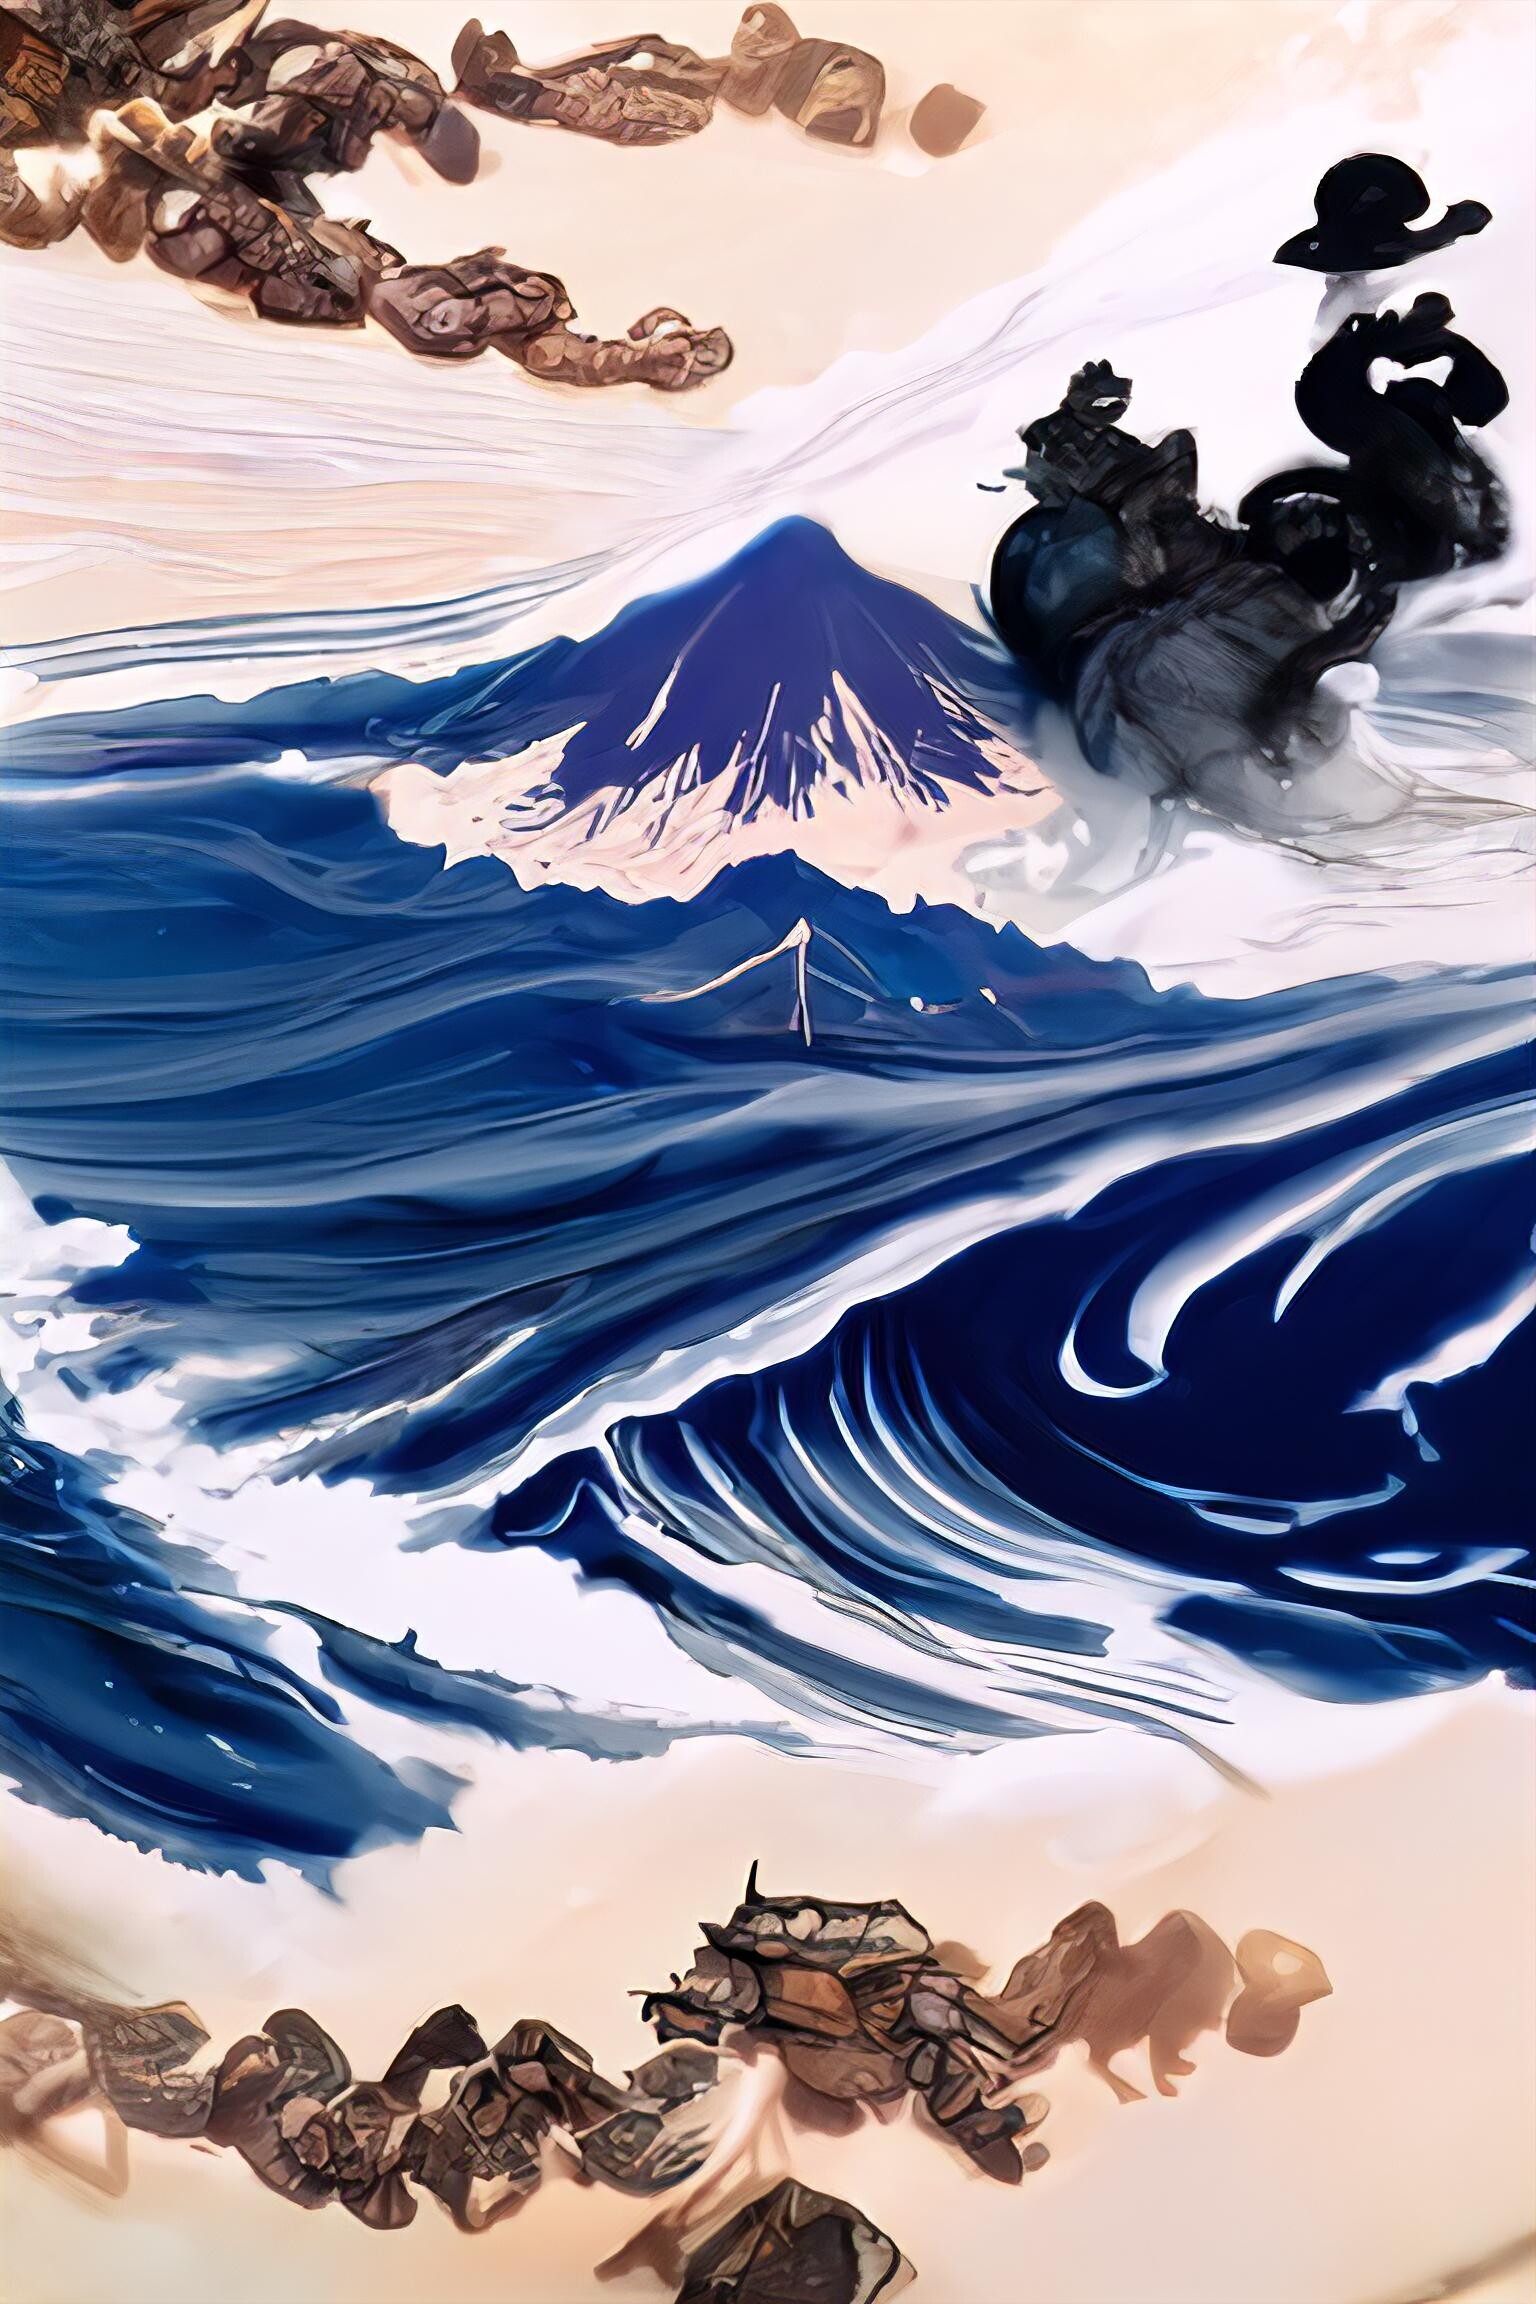 ArtStation - Waves and Fuji, in the style of Hokusai - Series 5